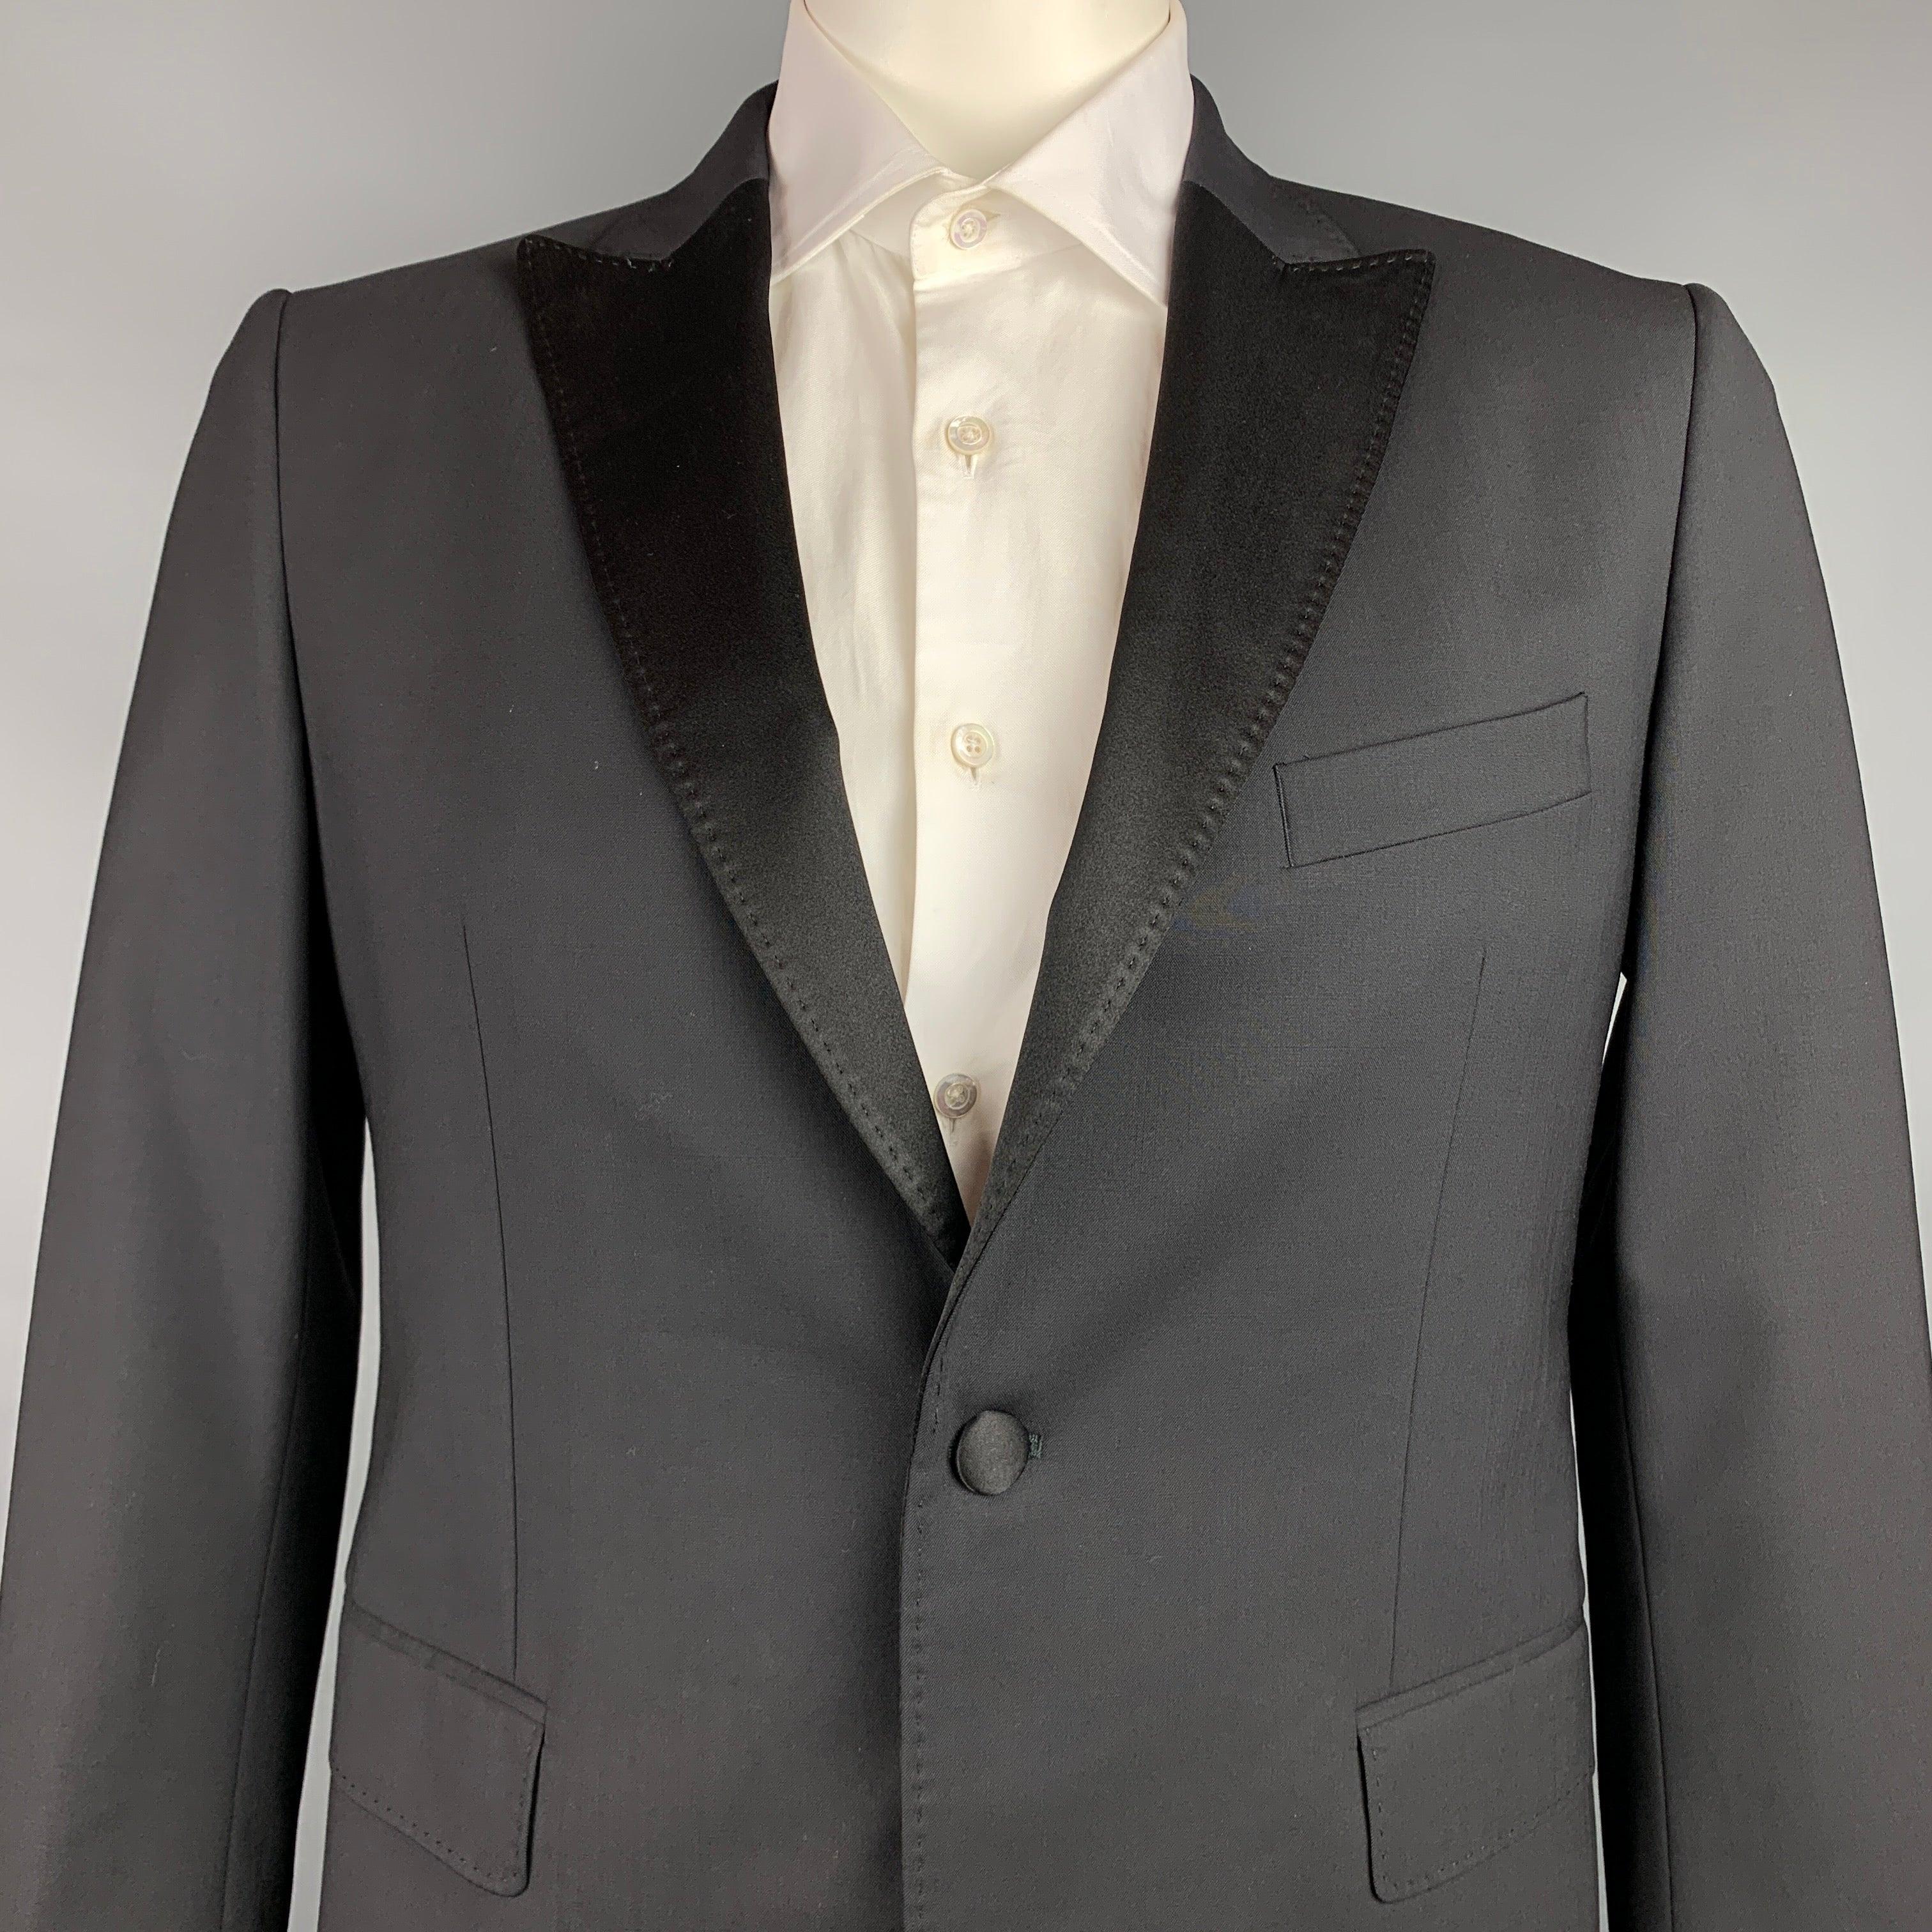 JOHN RICHMOND
sport coat comes in a black wool with a full liner featuring a peak lapel, flap pockets, beaded back design, and a single button closure. Made in USA.Very Good Pre-Owned Condition. 

Marked:   52 

Measurements: 
 
Shoulder: 18 inches 